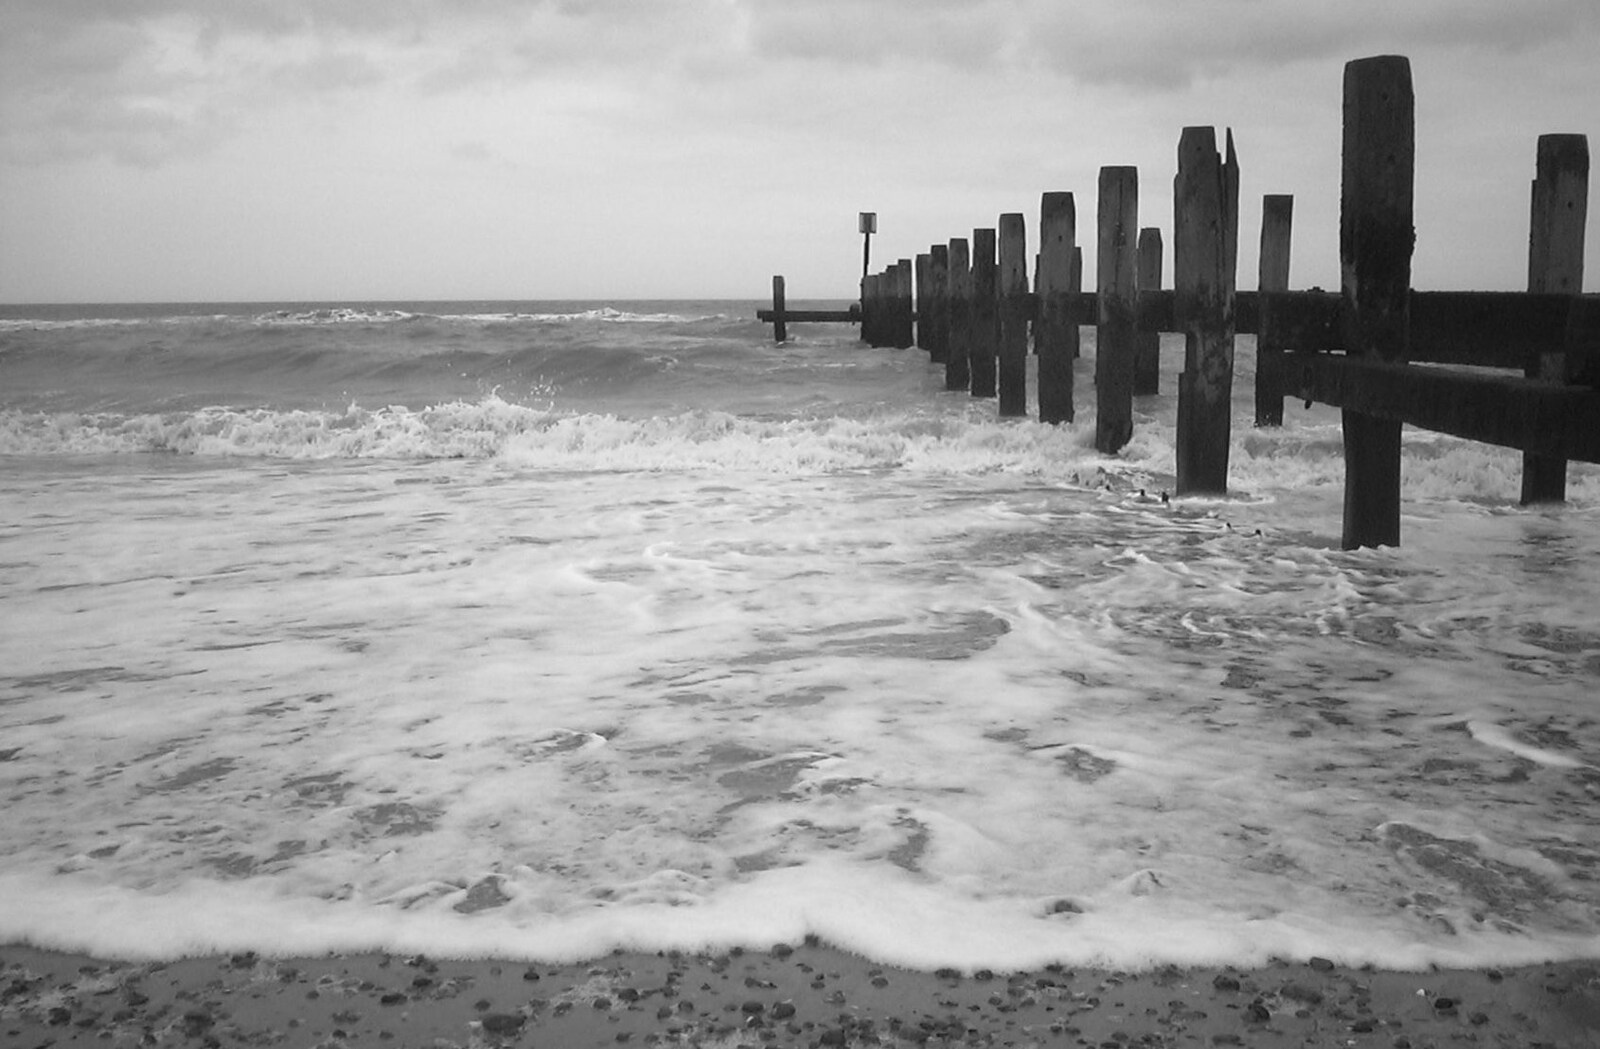 Groynes in the sea from Moping in Southwold, Suffolk - 3rd April 2004